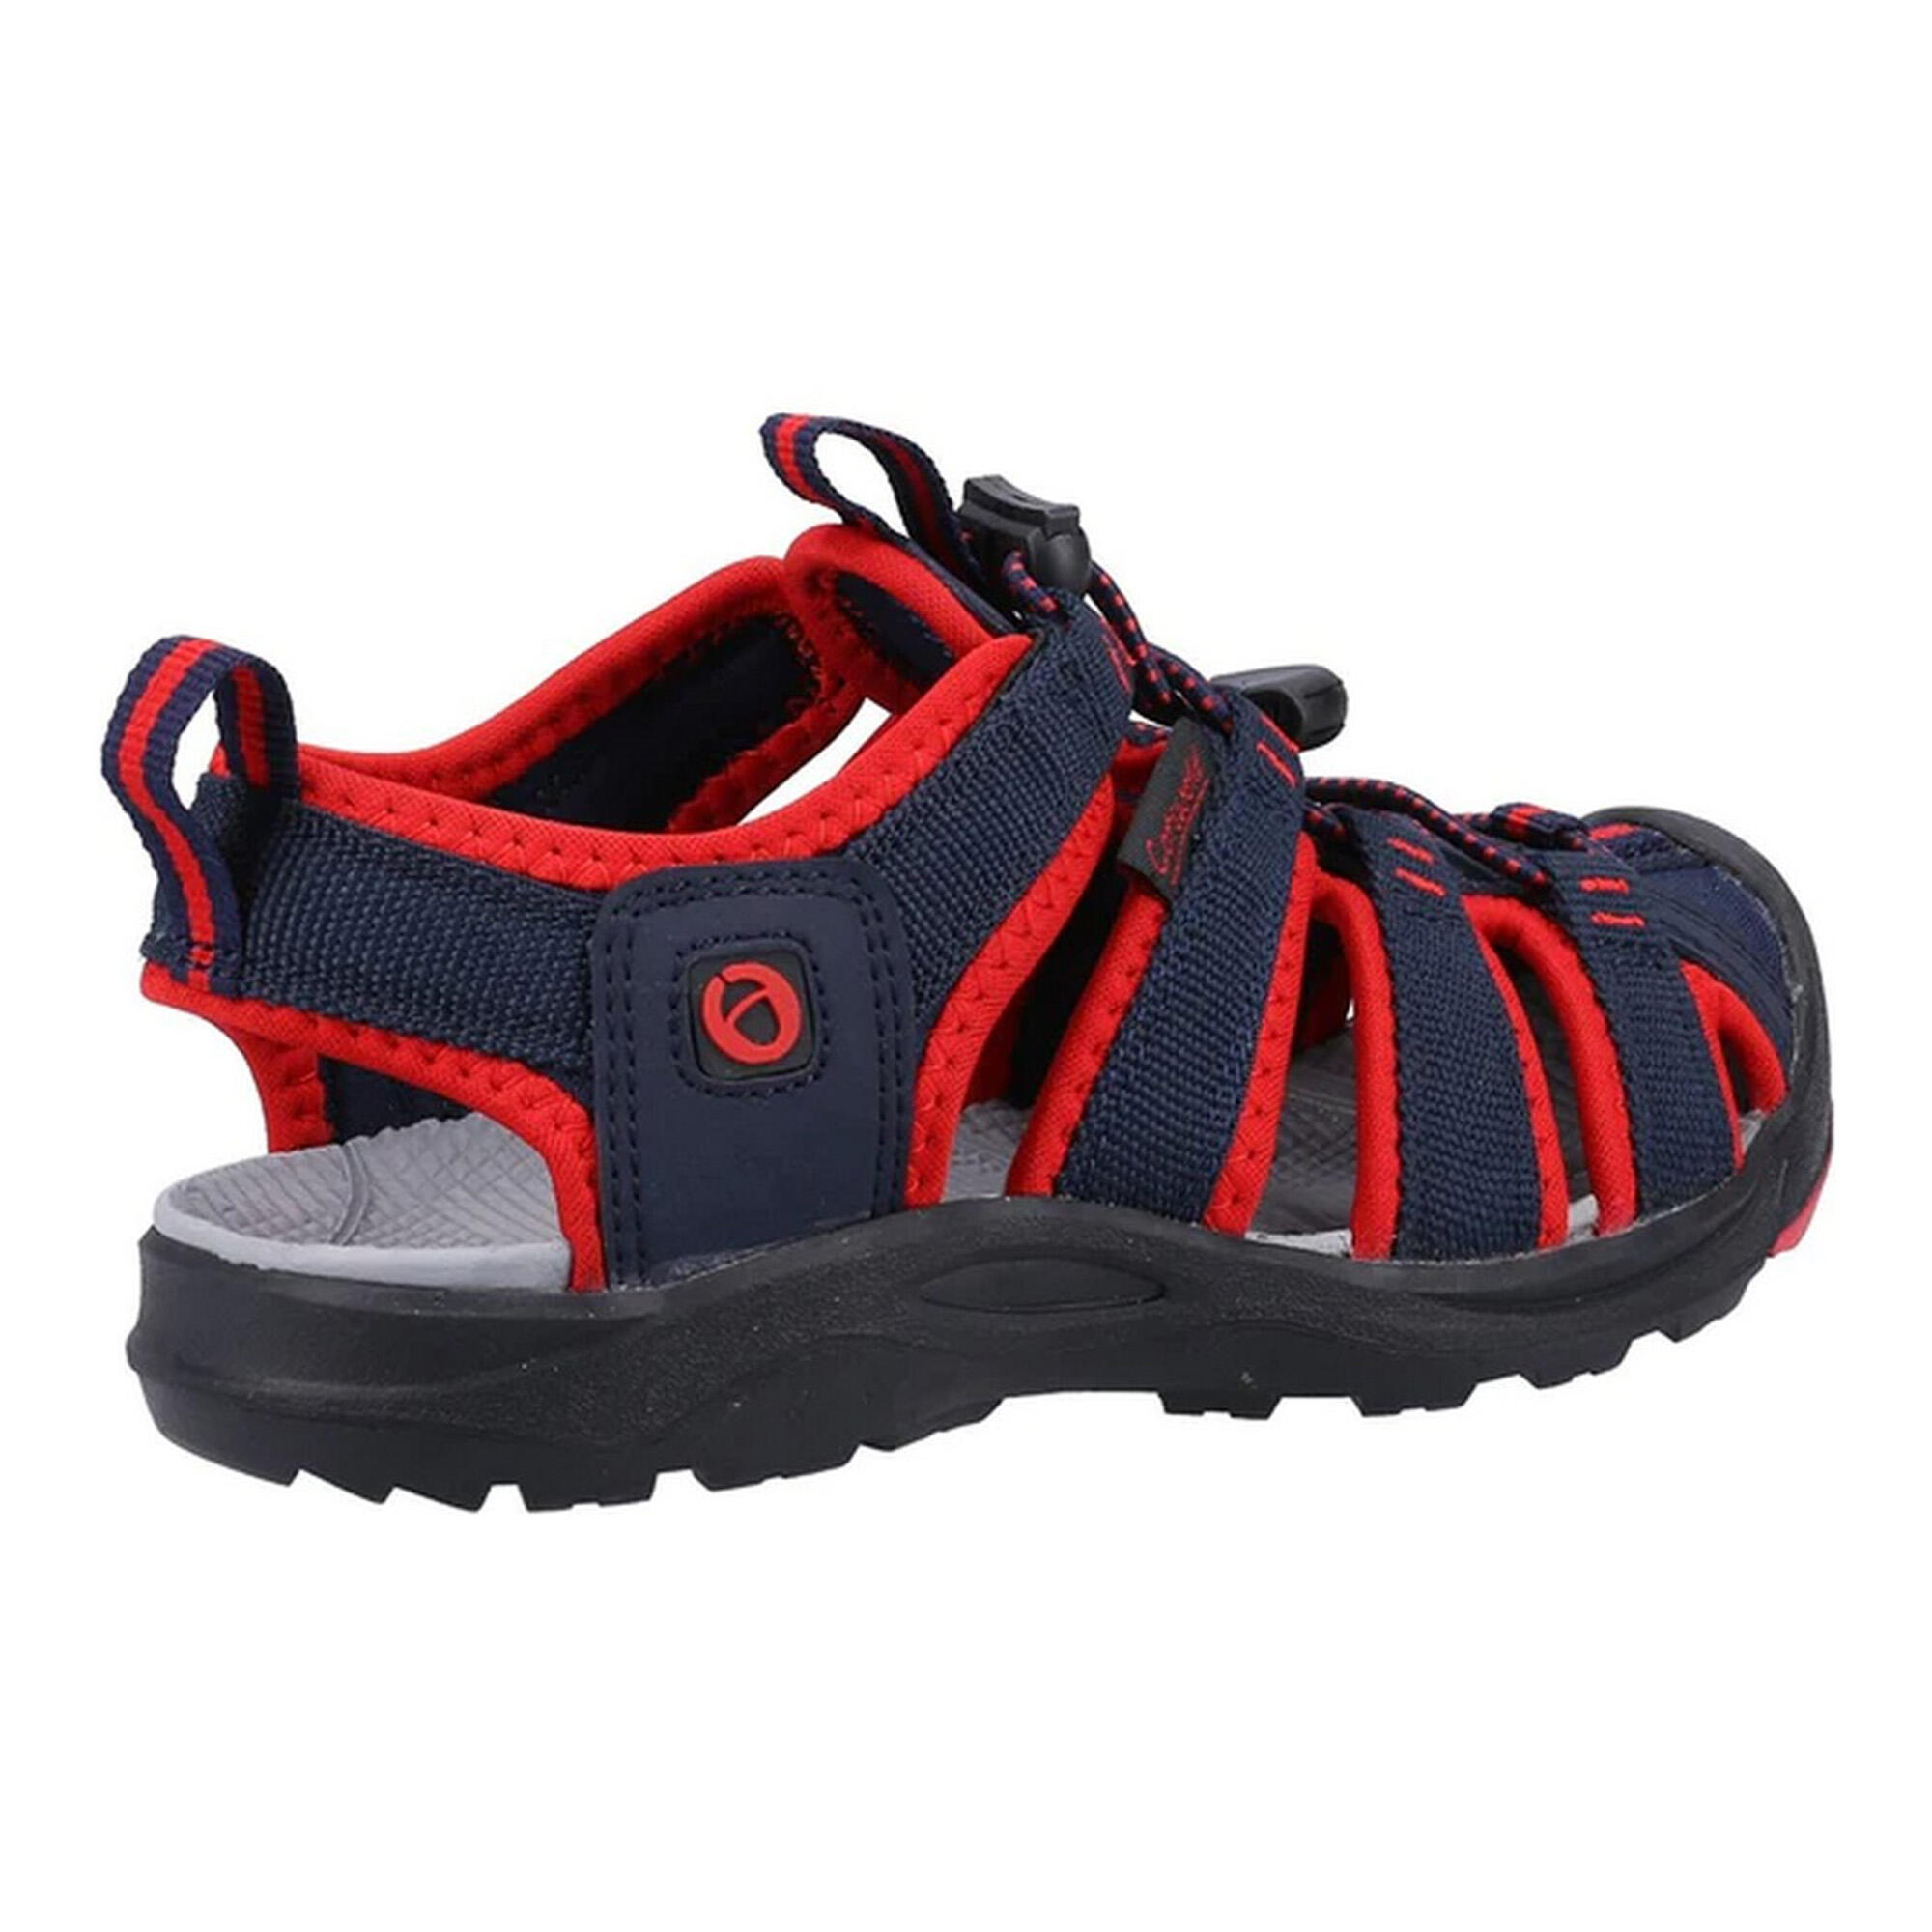 Childrens/Kids Marshfield Recycled Sandals (Navy/Red) 2/5